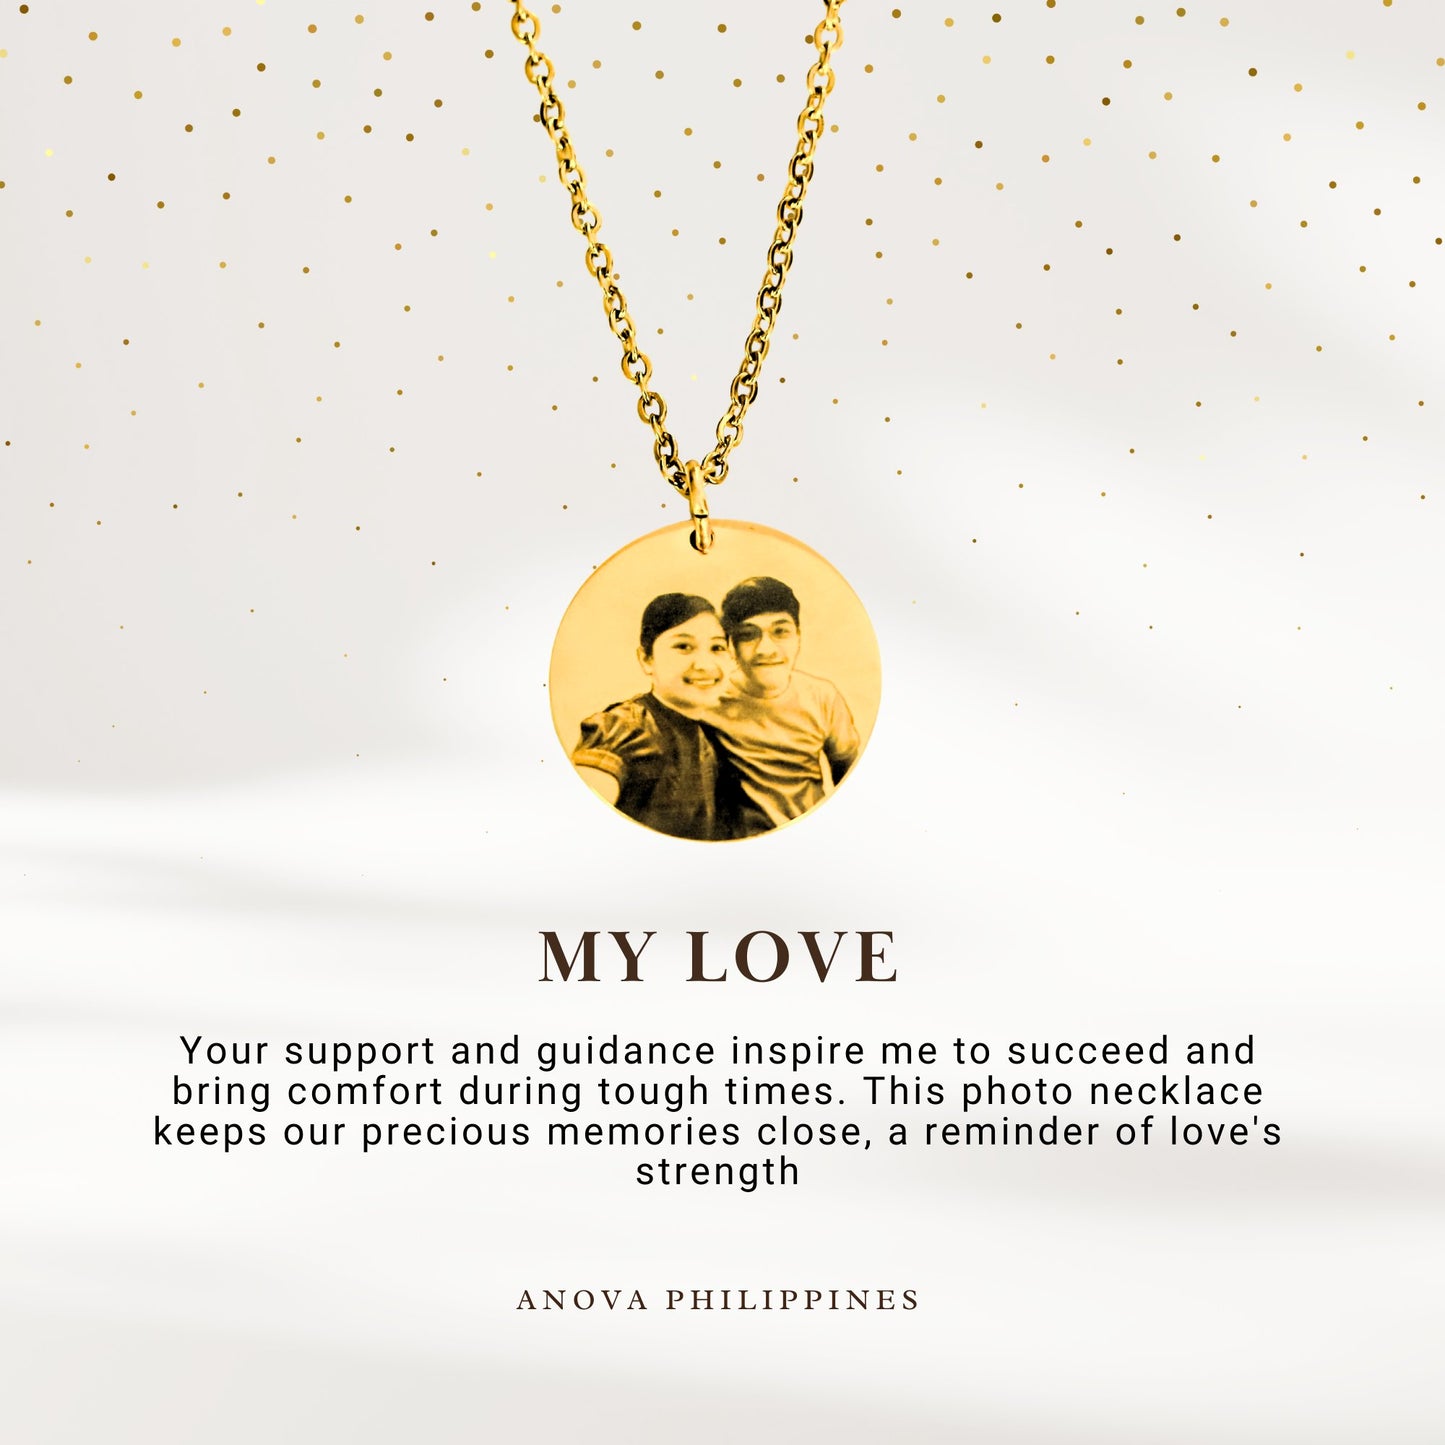 Photo Engraved Portrait Necklace Gift [Buy 1 take 1 FREE]